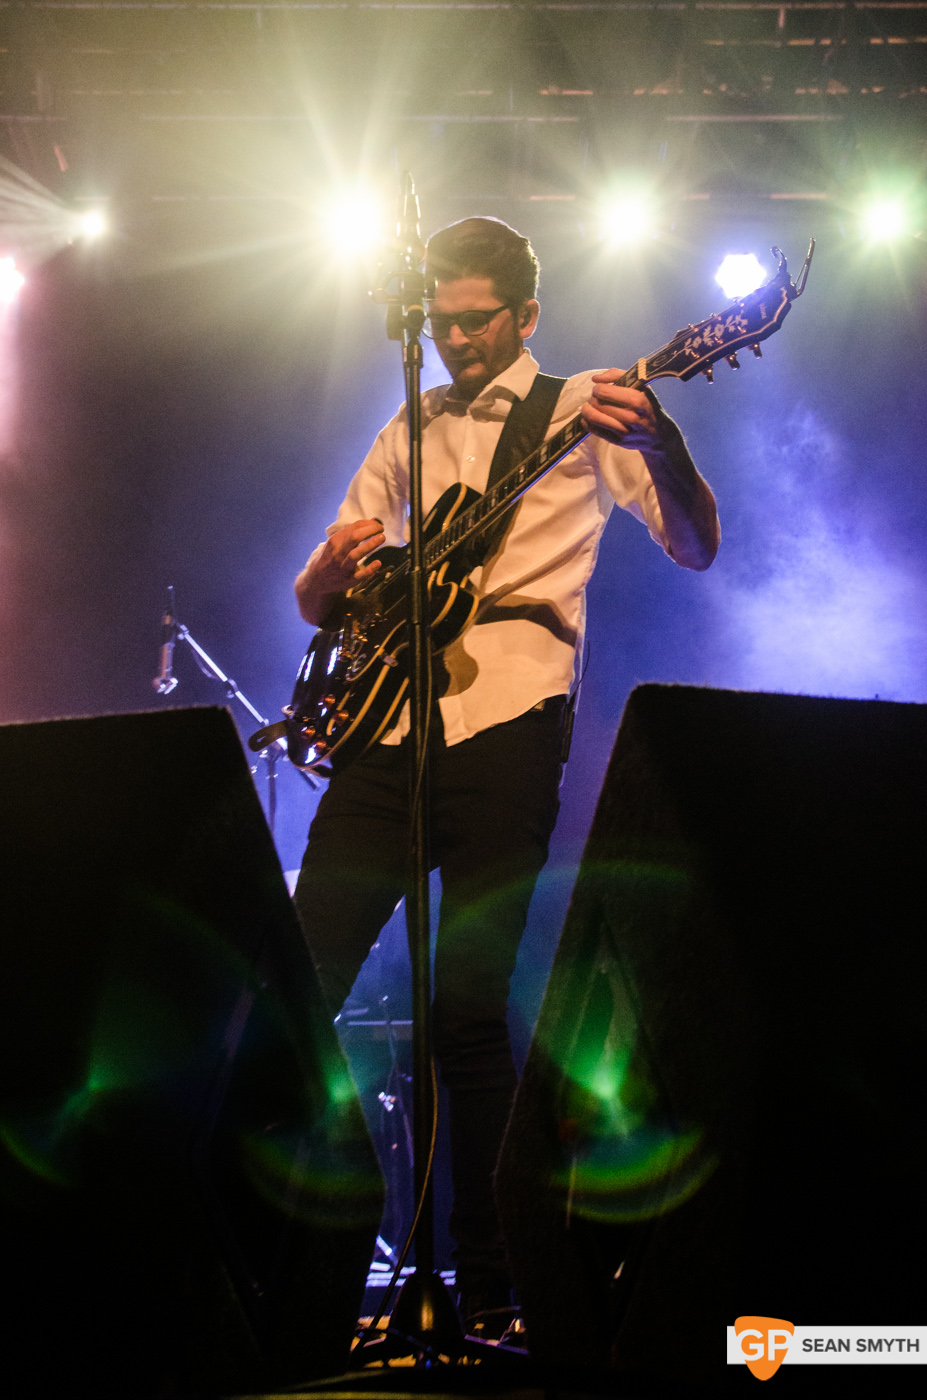 hudson-taylor-at-the-olympia-theatre-26-2-15-by-sean-smyth-26-of-26_16756757135_o